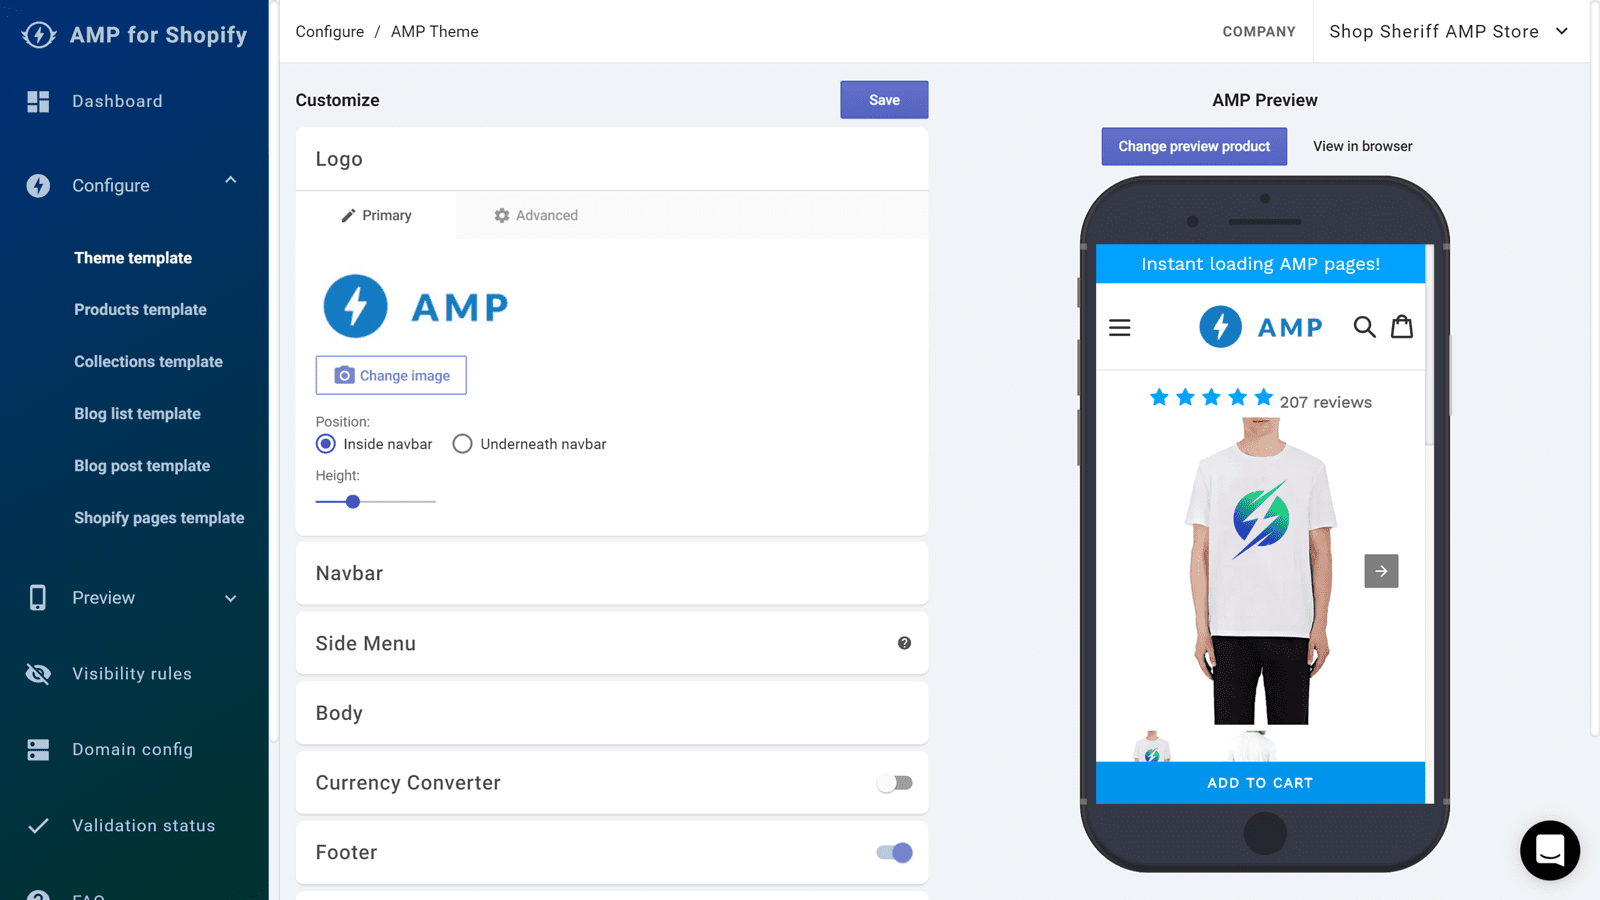 Set up AMP pages on Shopify with AMP by Shop Sheriff